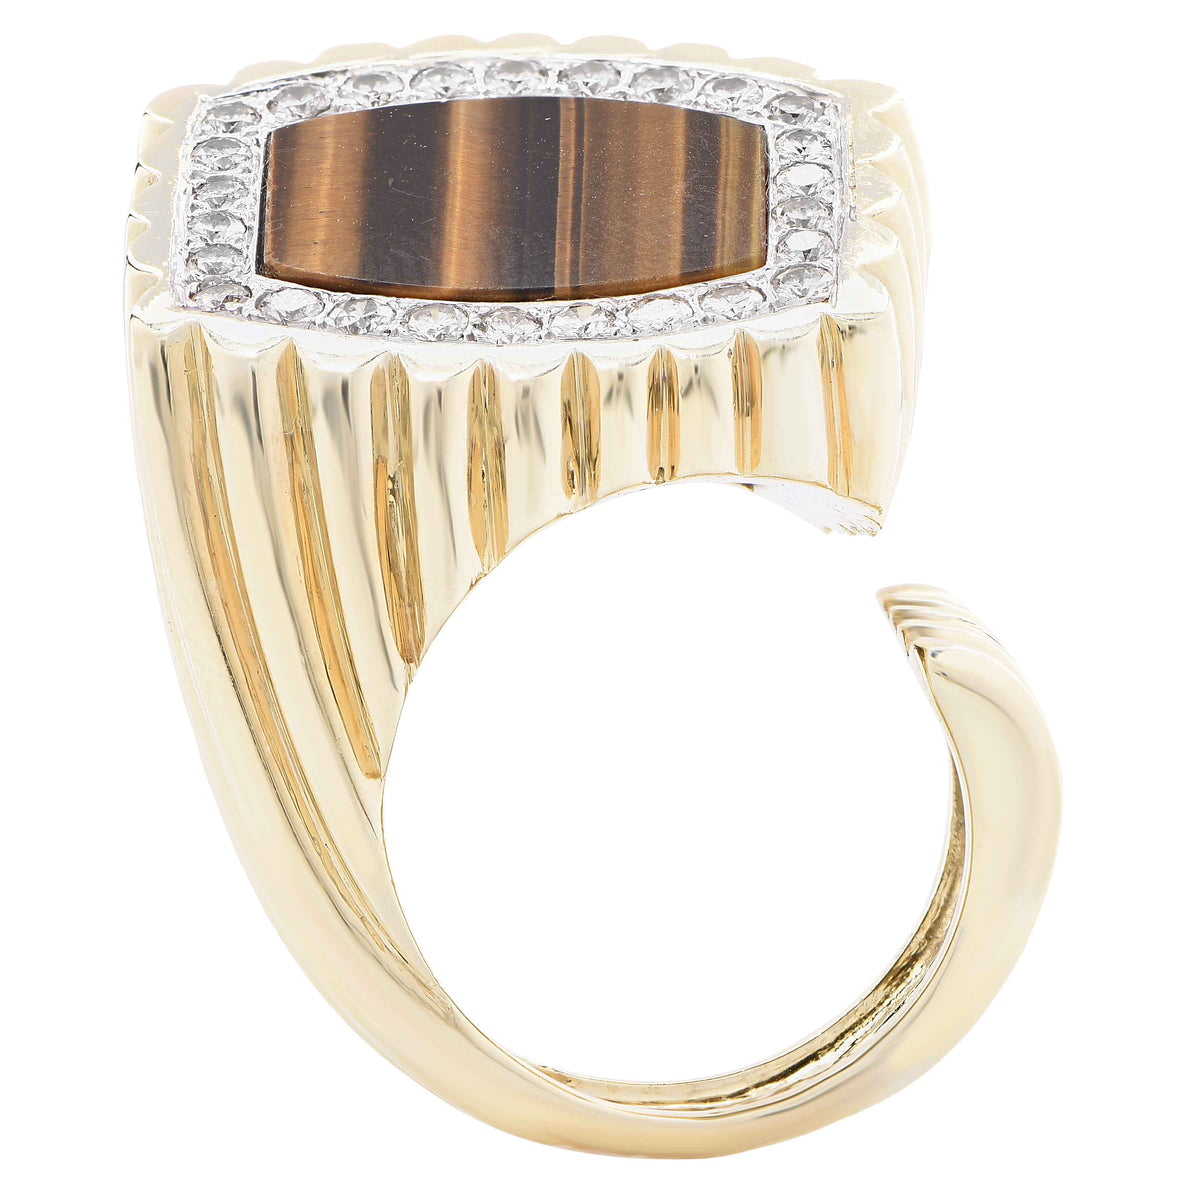 Le Triomphe Tiger's Eye, Diamond and Gold Ring